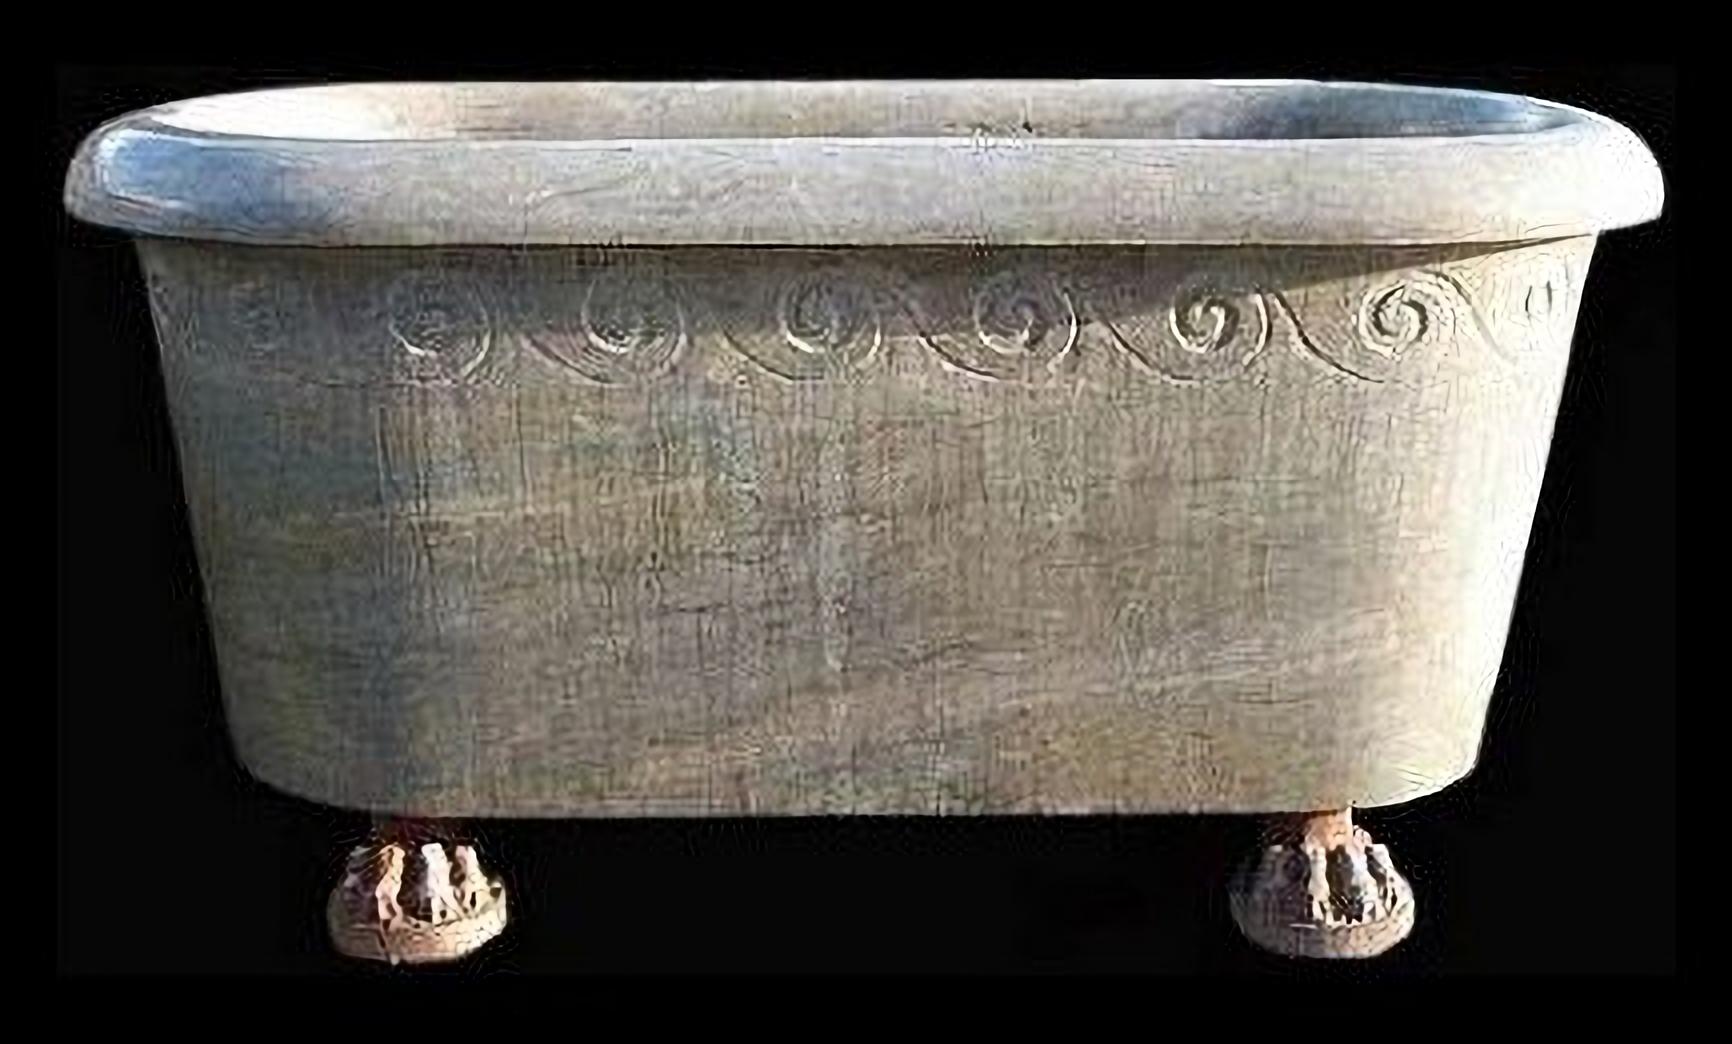 WONDERFUL ITALIAN GIANT ANTIQUE STONE BATHTUB end 19th Century

Bathtub with a beautiful motif taken from the Greek iconography of the Golden Age (400 BC).
The feet are in terracotta
end 19th Century
HEIGHT 76cm
WIDTH 64cms
LENGTH 175cm
INTERNAL